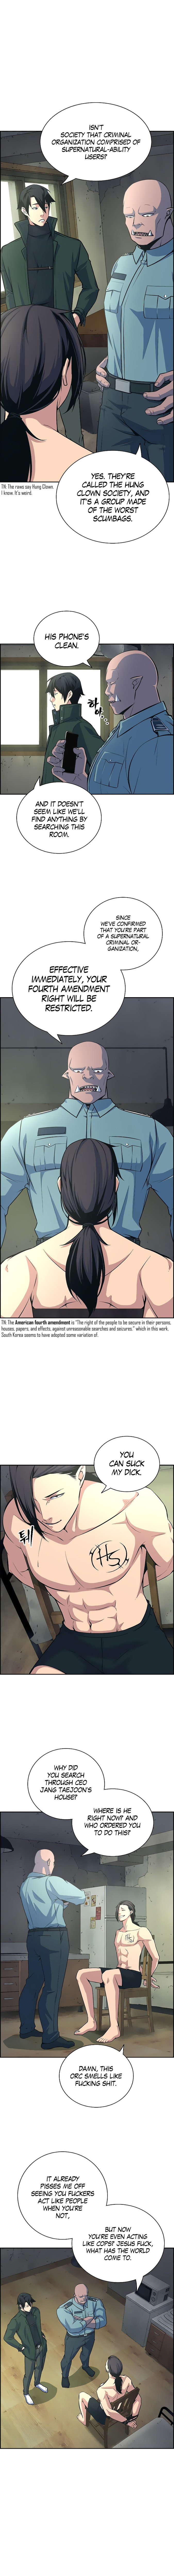 Foreigner on the Periphery - Chapter 5 Page 8